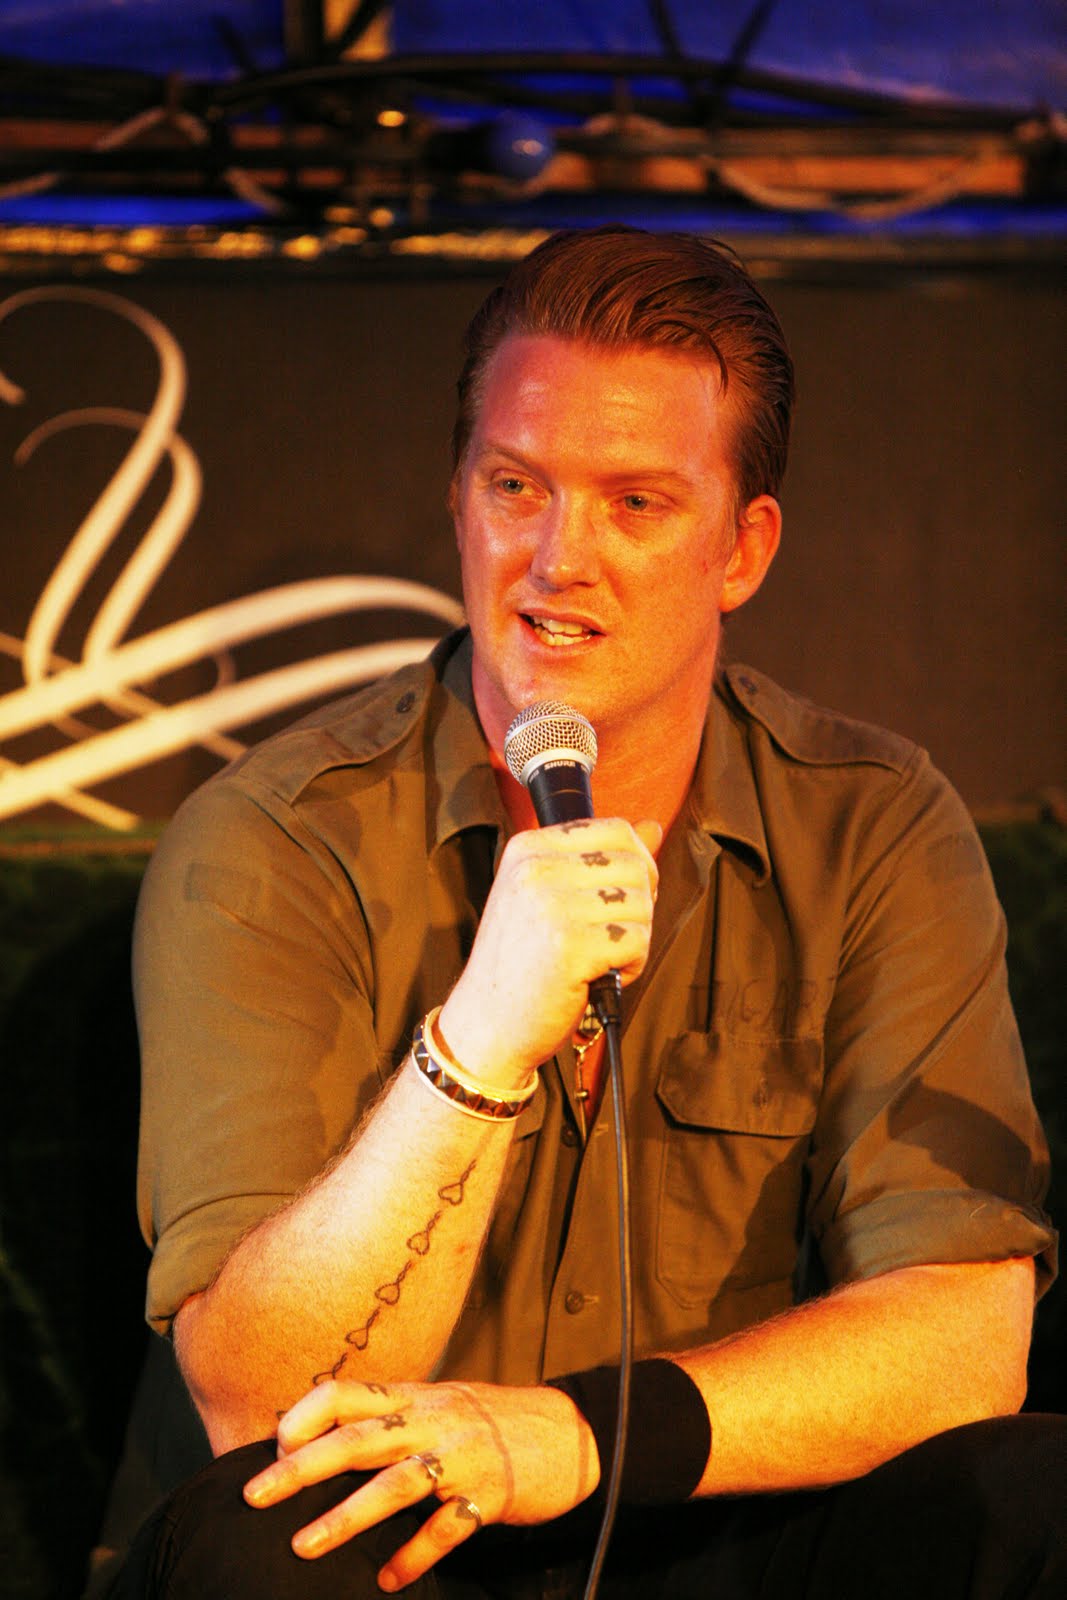 Bodypainting and Tattoos: Josh Homme Tattoos - Male Celebrity Tattoo Ideas